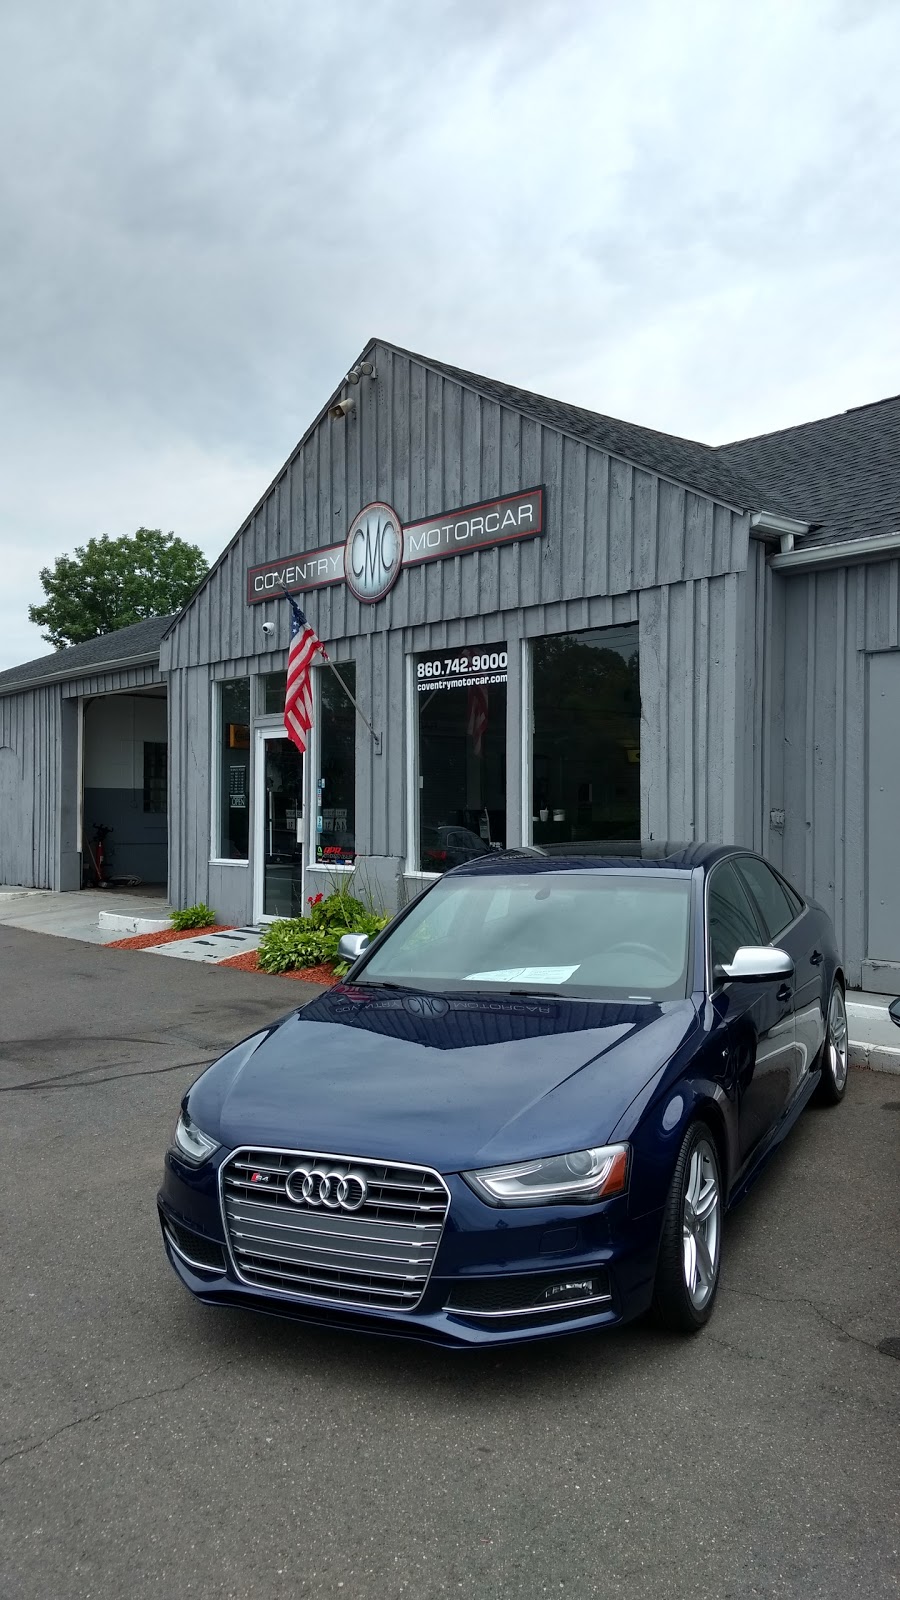 Coventry Motorcar | 2152 Boston Turnpike, Coventry, CT 06238 | Phone: (860) 742-9000